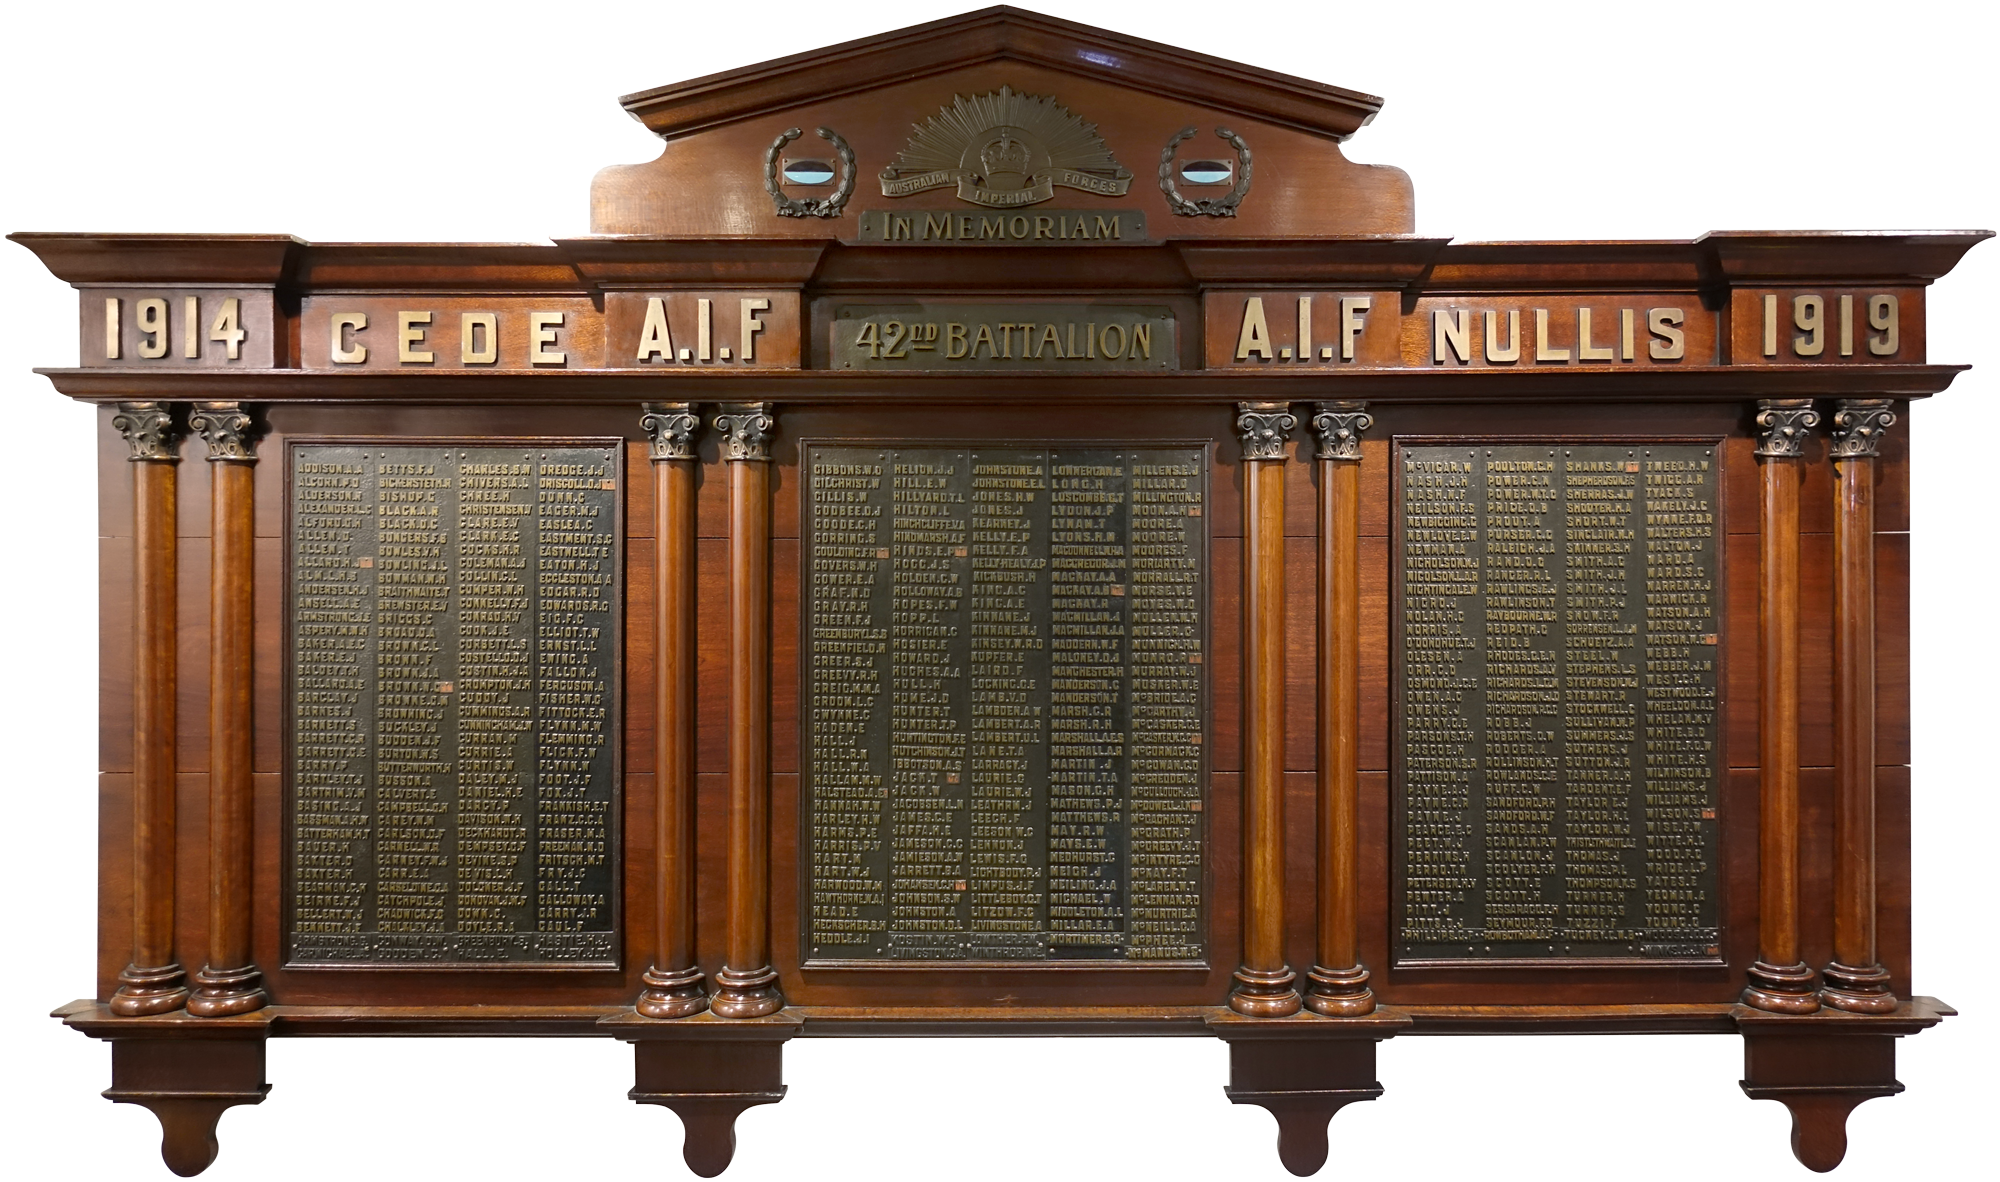 Photograph of three-panelled timber honour board with names of soldiers from the 42nd Infantry Battalion